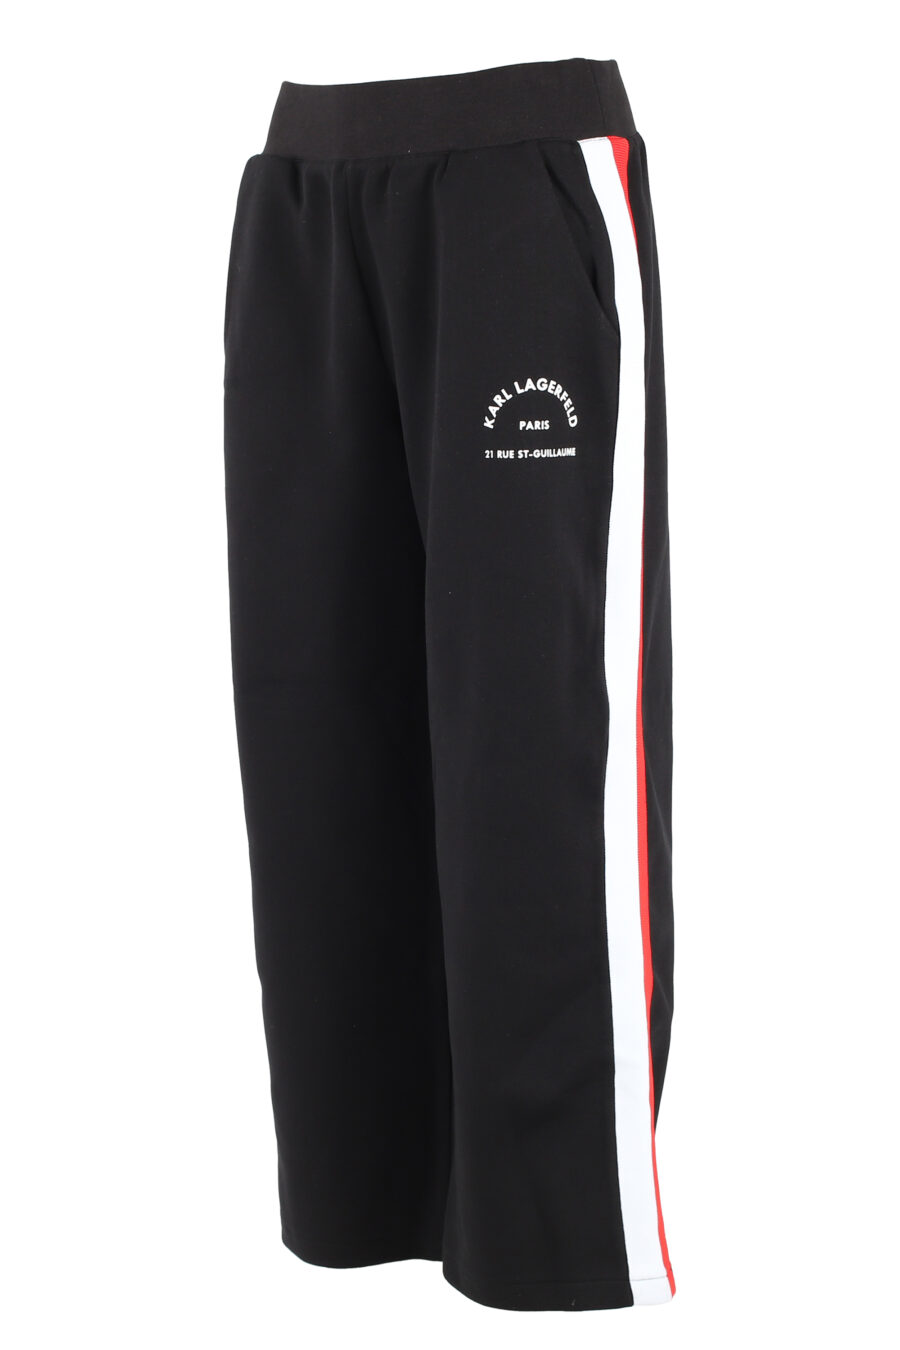 Tracksuit bottoms black with multicoloured side stripes - IMG 5051